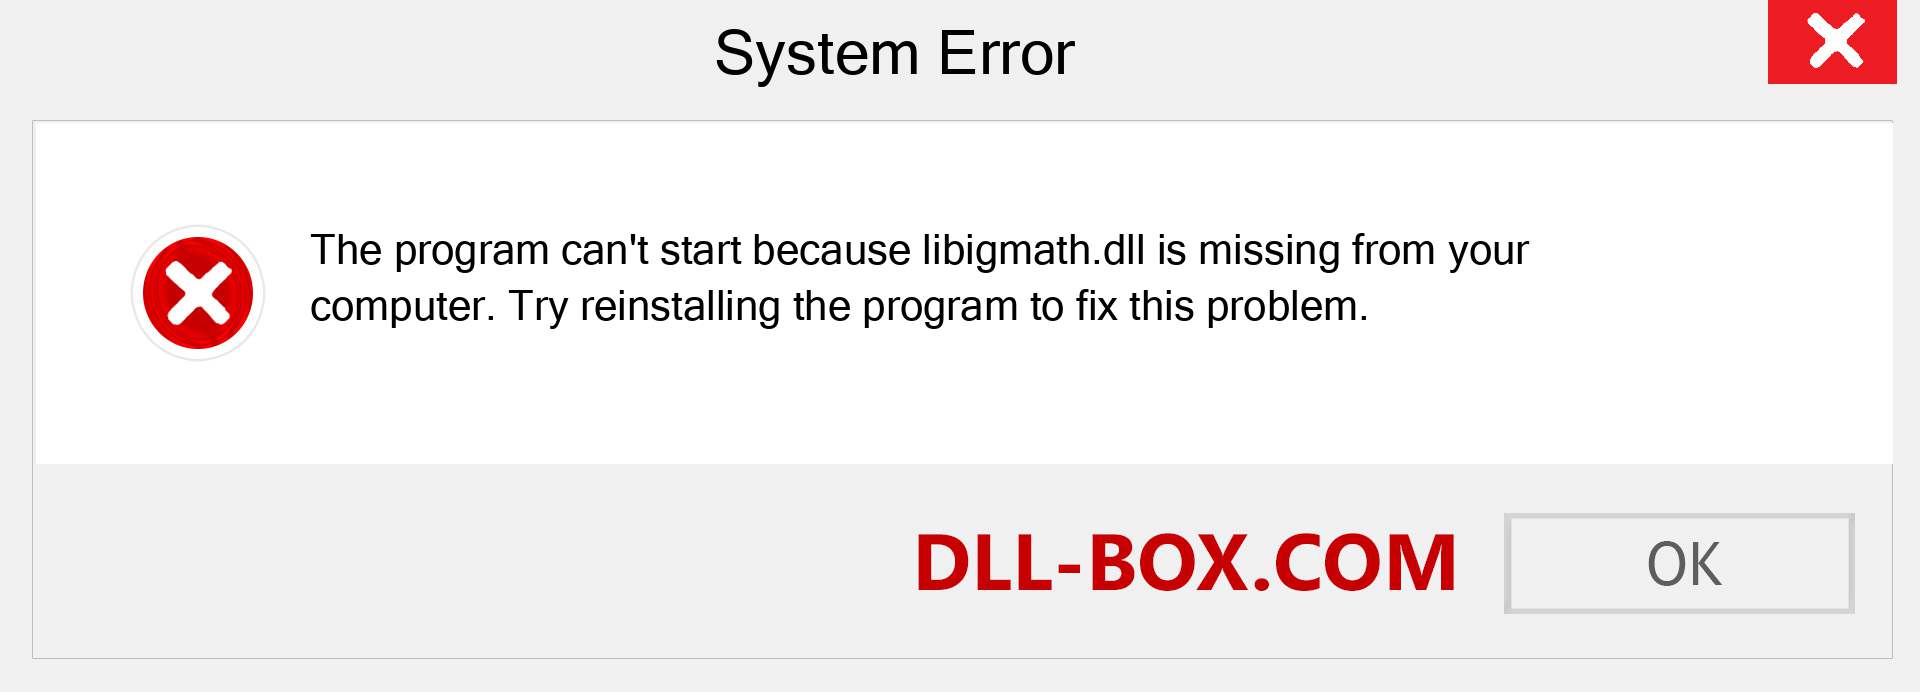  libigmath.dll file is missing?. Download for Windows 7, 8, 10 - Fix  libigmath dll Missing Error on Windows, photos, images